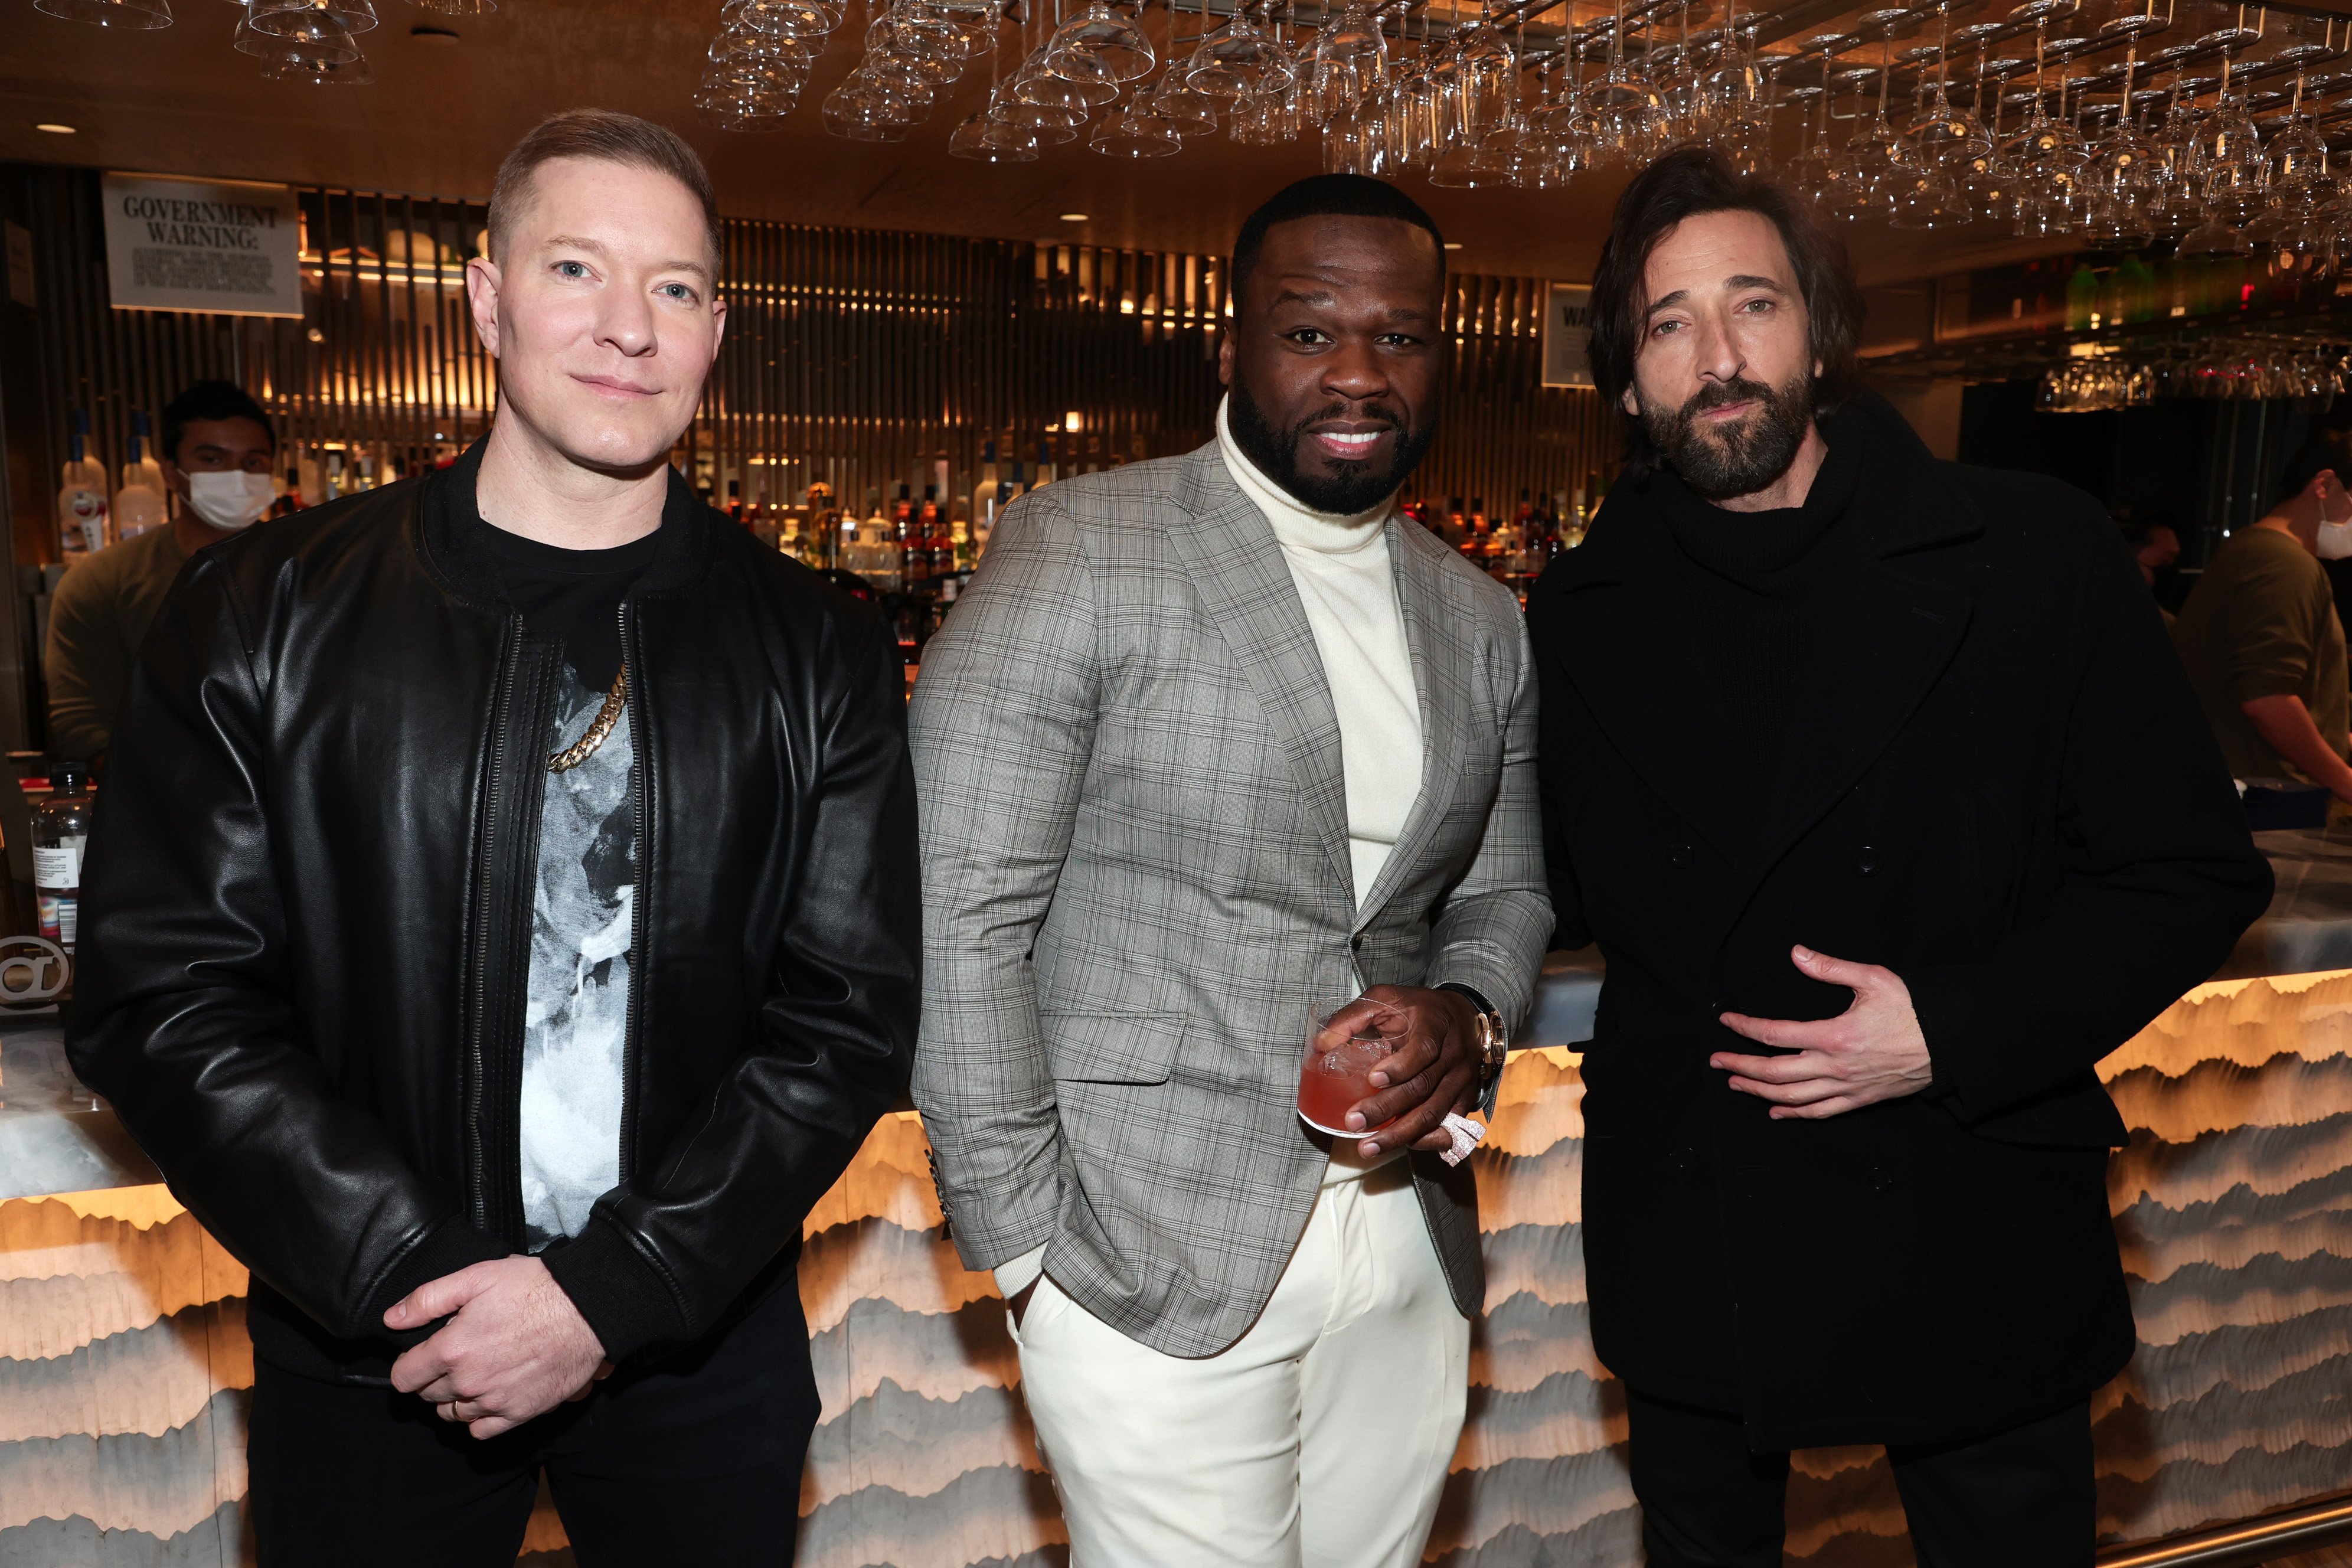 Joseph Sikora, Curtis “50 Cent” Jackson, and Adrien Brody pose for a photo at the "Power Book IV: Force" Premiere at Pier 17 Rooftop on January 28, 2022, in New York City | Source: Getty Images